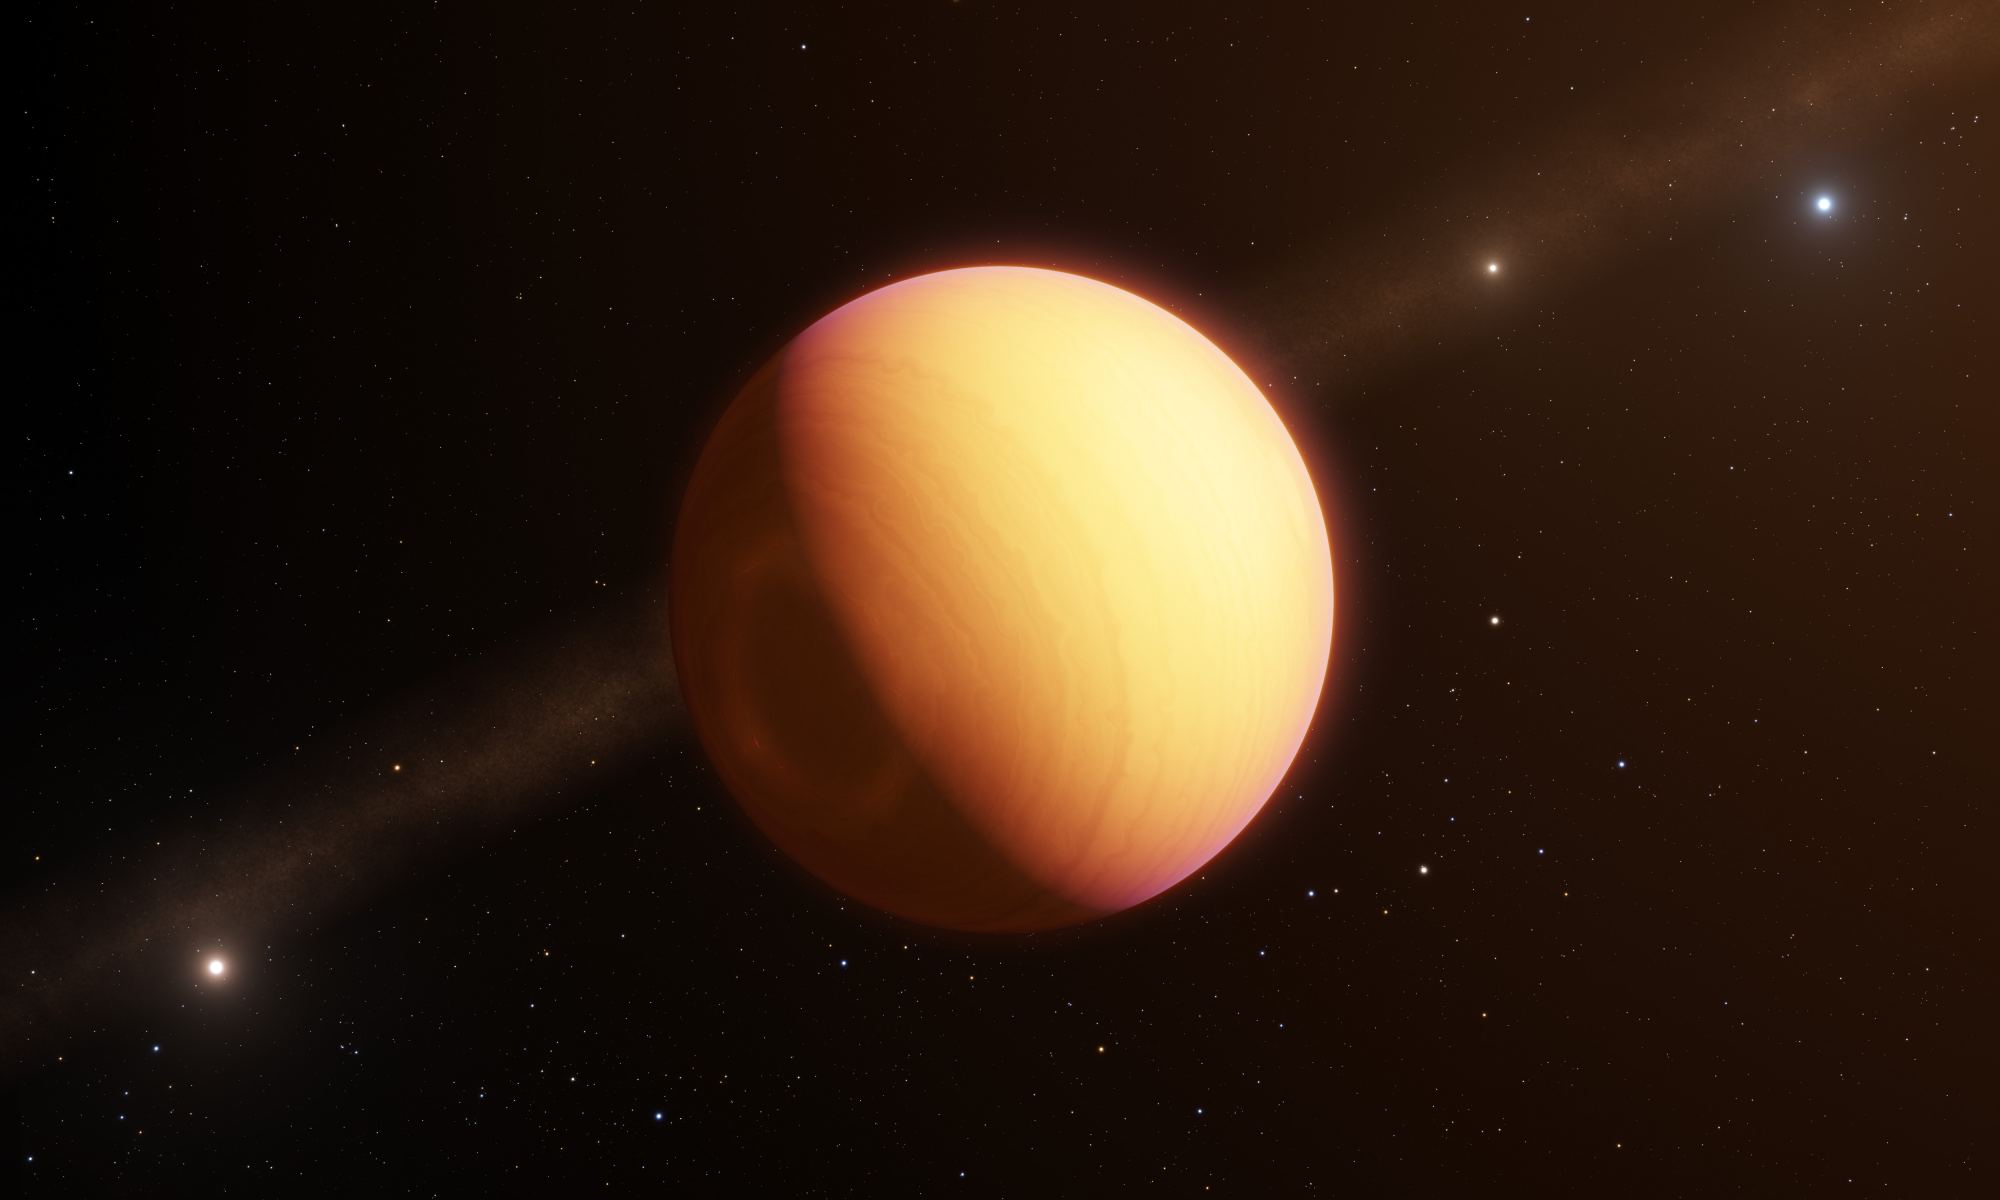 An artist's illustration of the exoplanet HR8799e. The ESO's GRAVITY instrument on its Very Large Telescope Interferometer made the first direct optical observation of this planet and its atmosphere. Image Credit: ESO/L. Calçada